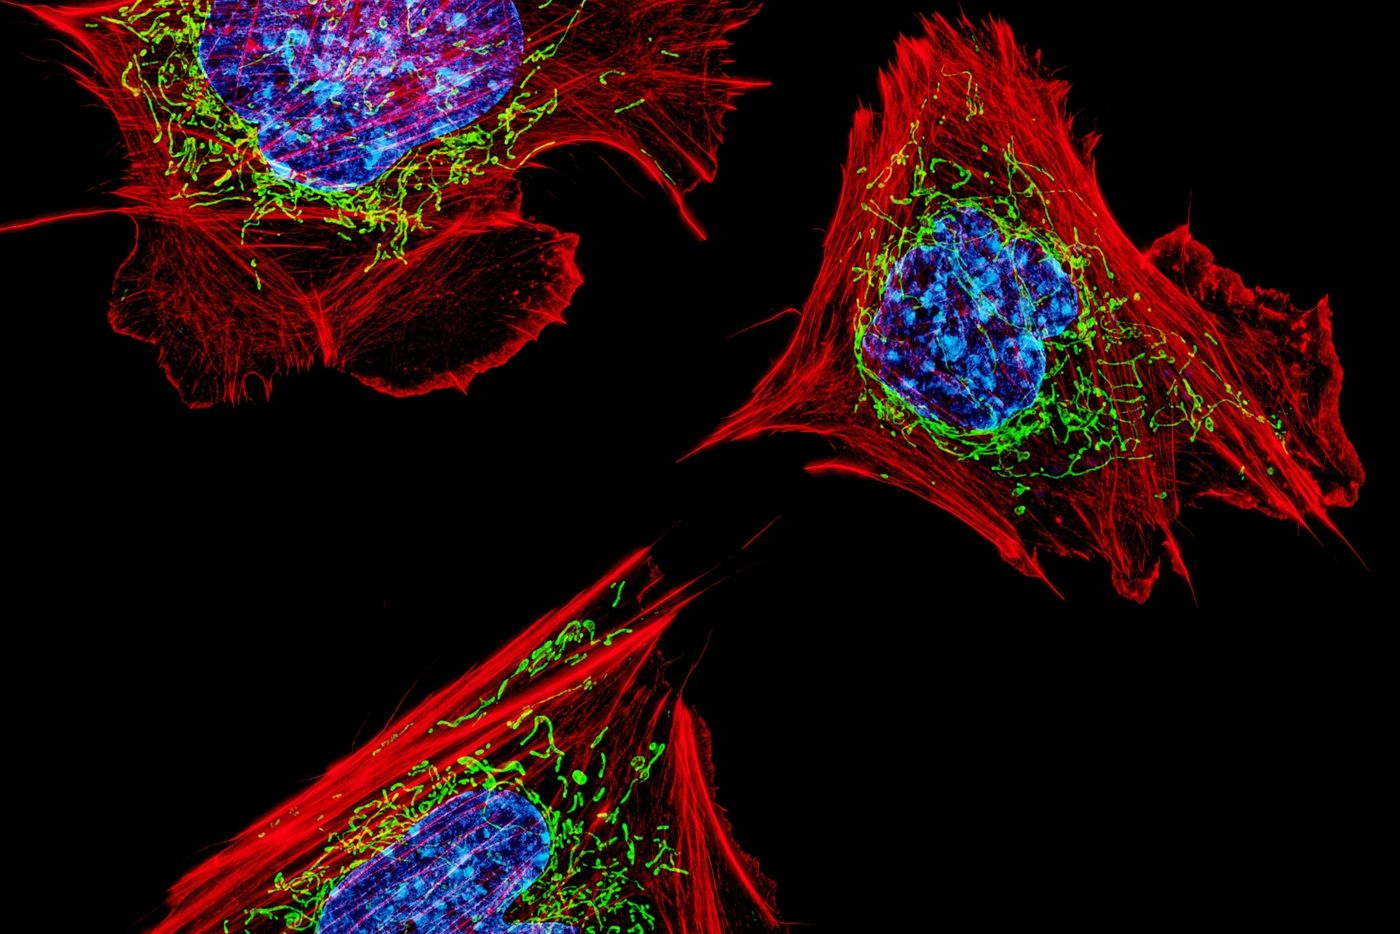 Mouse cells with mitochondria (green), nuclei (blue), and the actin cytoskeleton (red) / Credit: Image courtesy of Dylan Burnette and Jennifer Lippincott-Schwartz, Eunice Kennedy Shriver National Institute of Child Health and Human Development, NIH. Part of the exhibit Life:Magnified by ASCB and NIGMS. Licensed under CC BY-NC-ND 2.0